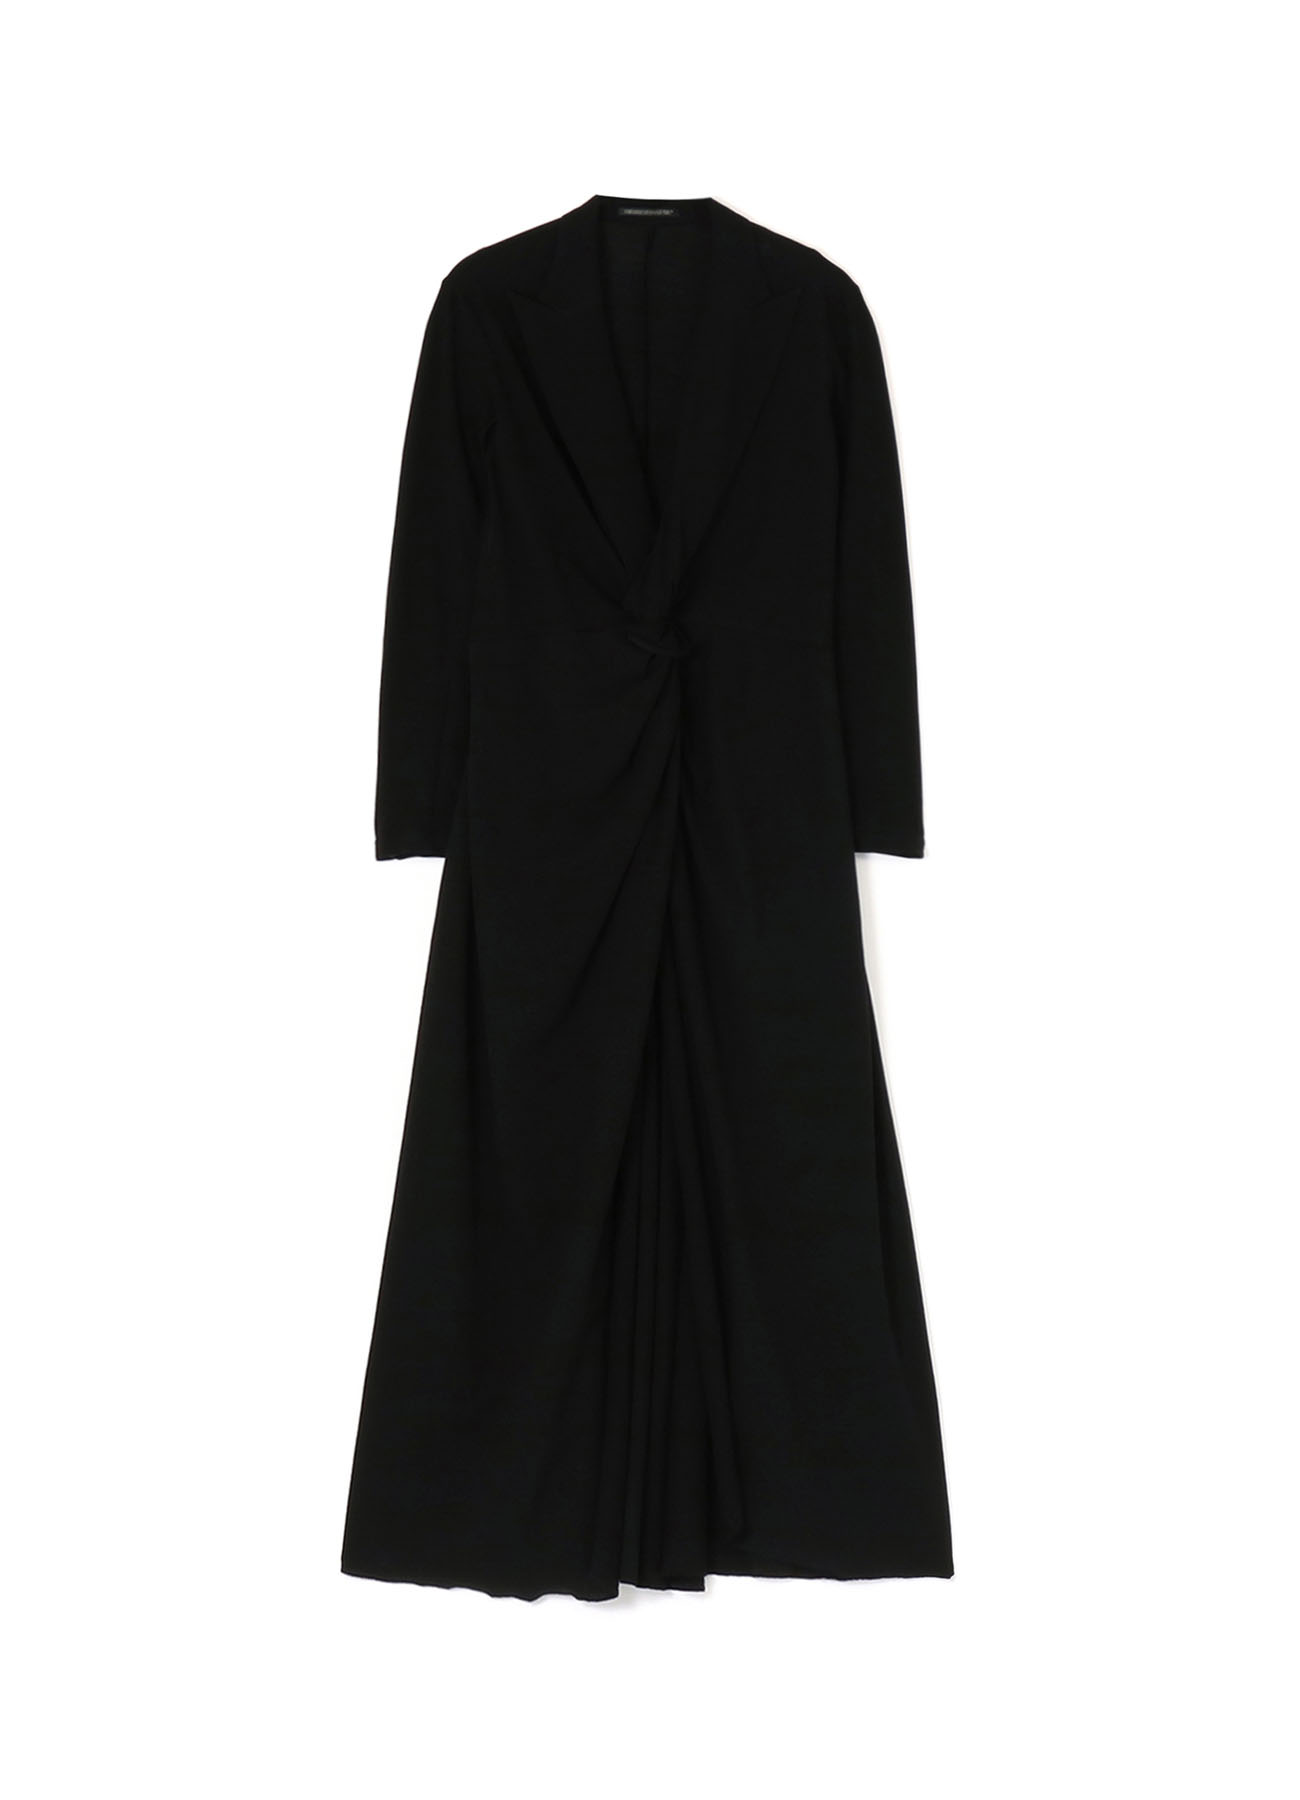 TECHNORAMA COTTON DRESS WITH PEAK LAPELS AND TWISTED FRONT DETAIL